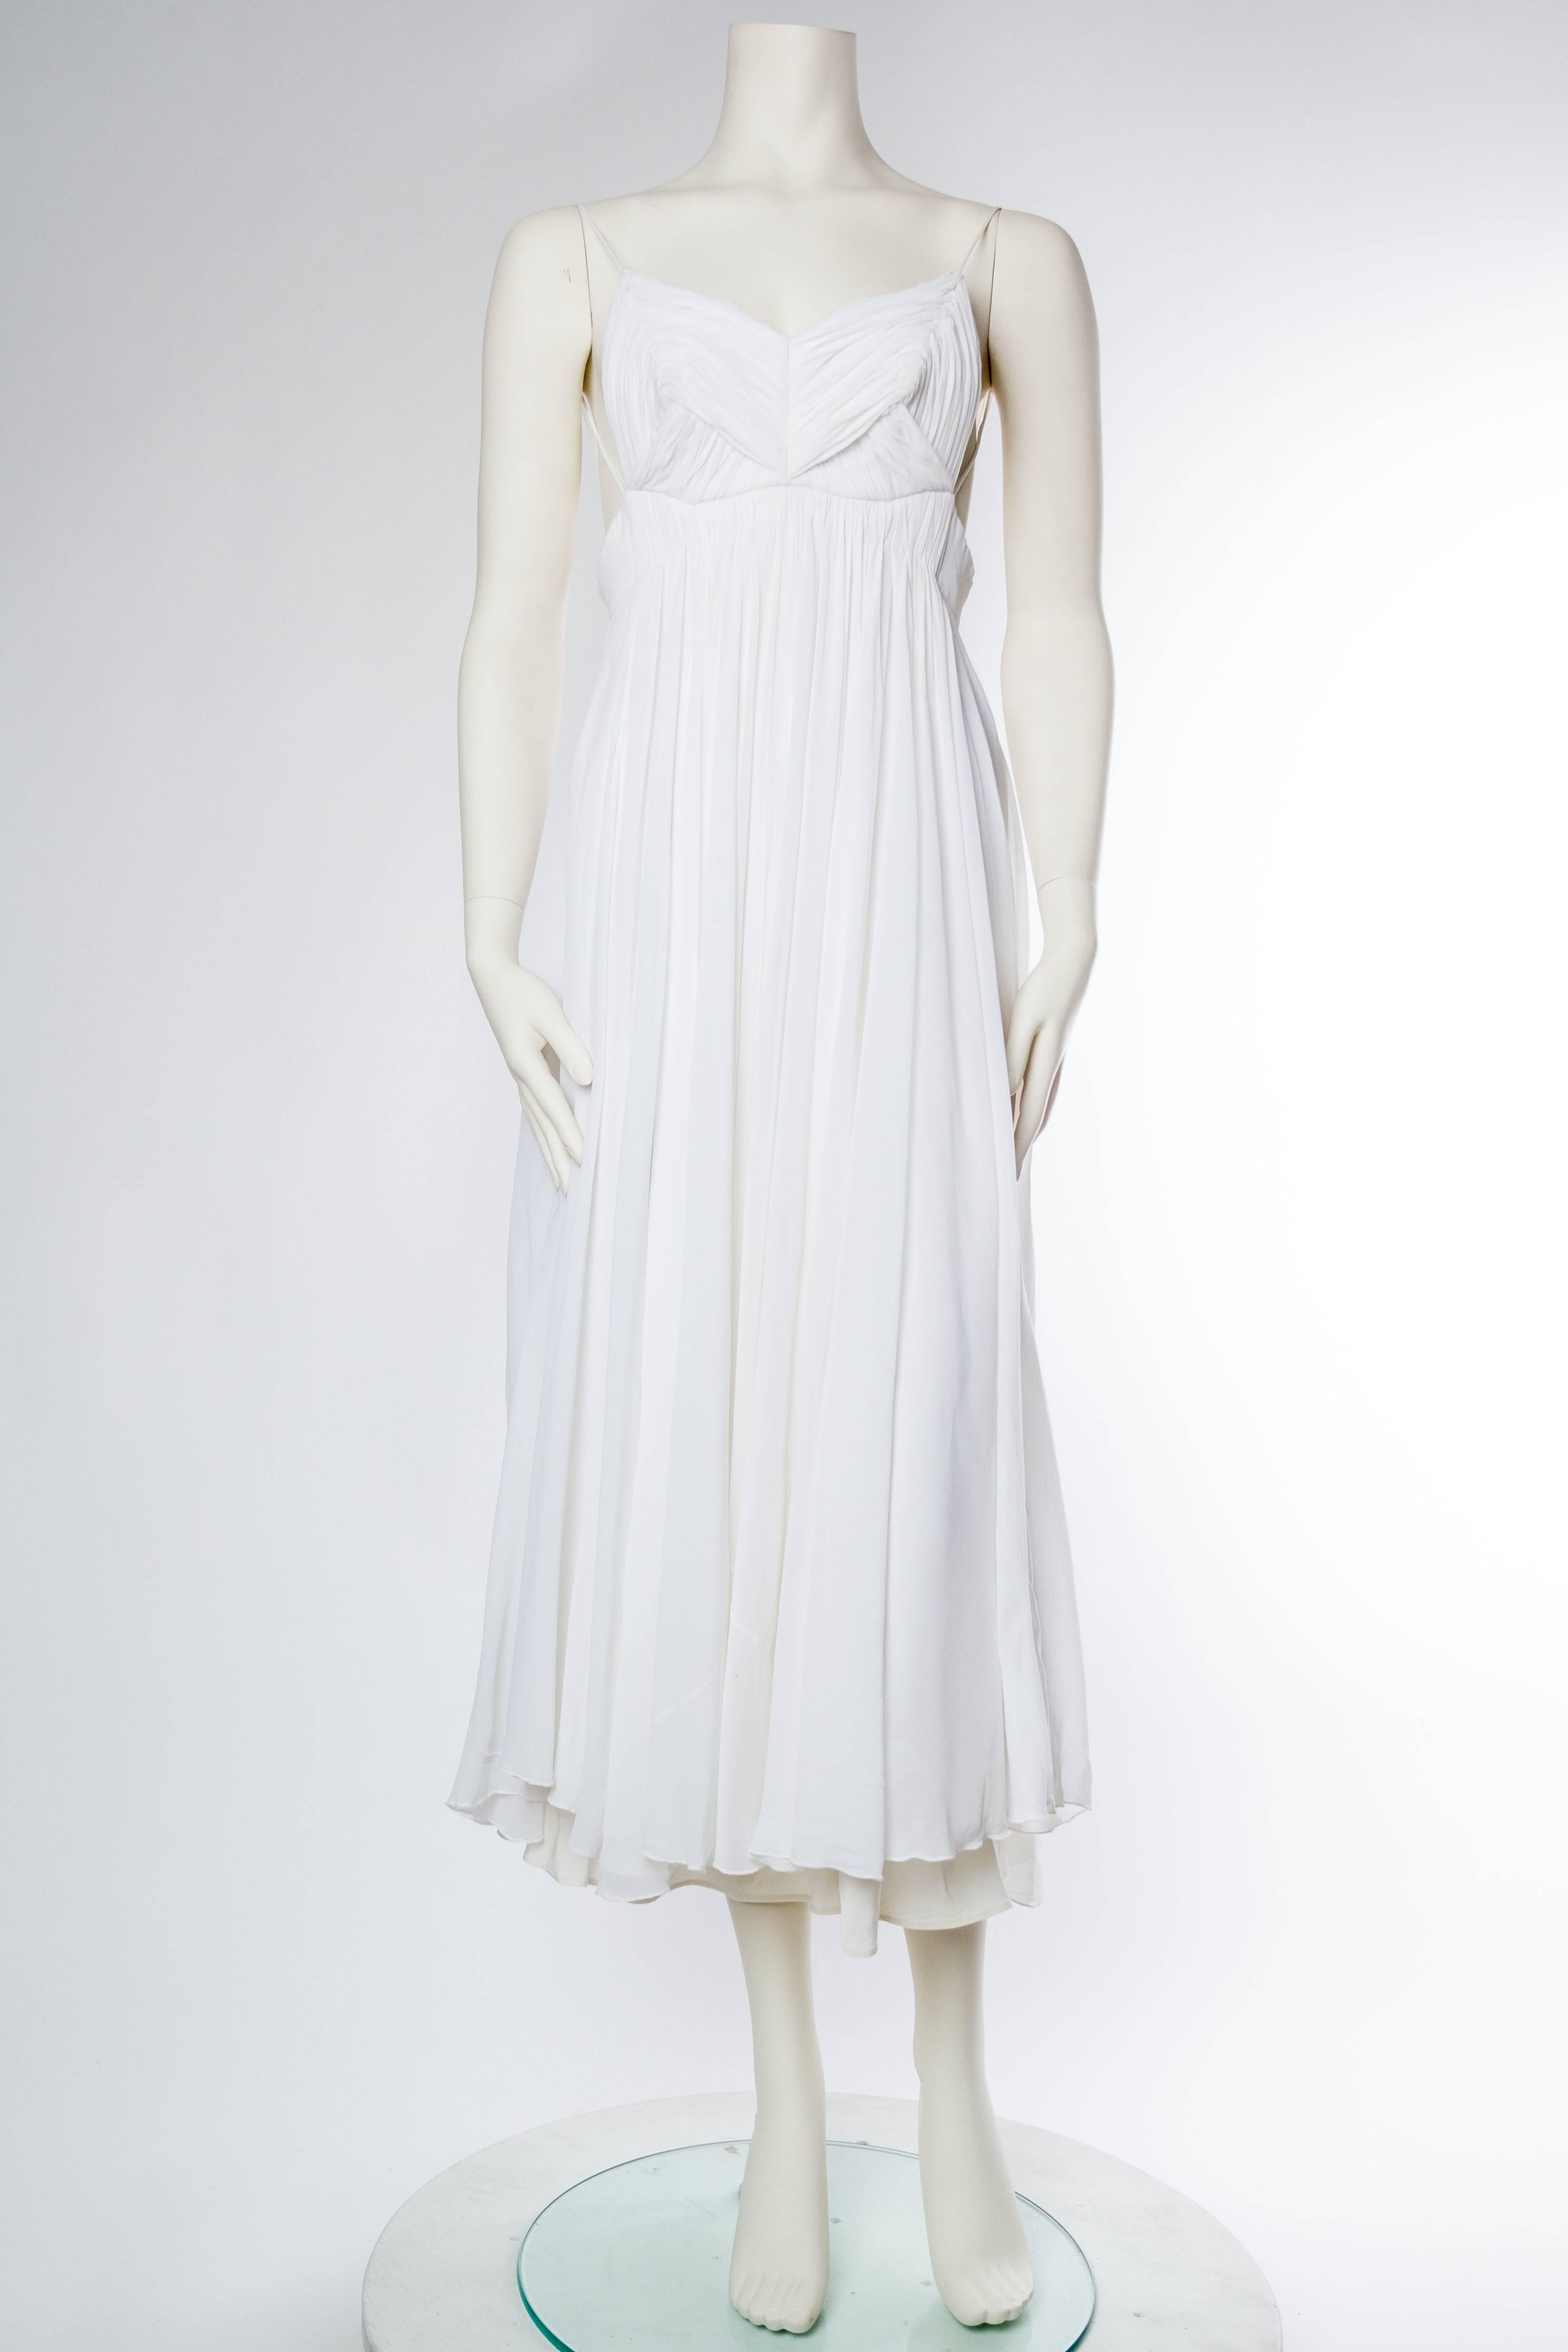 Gray Exquisite Madame Gres Style Pleated Chiffon Dress